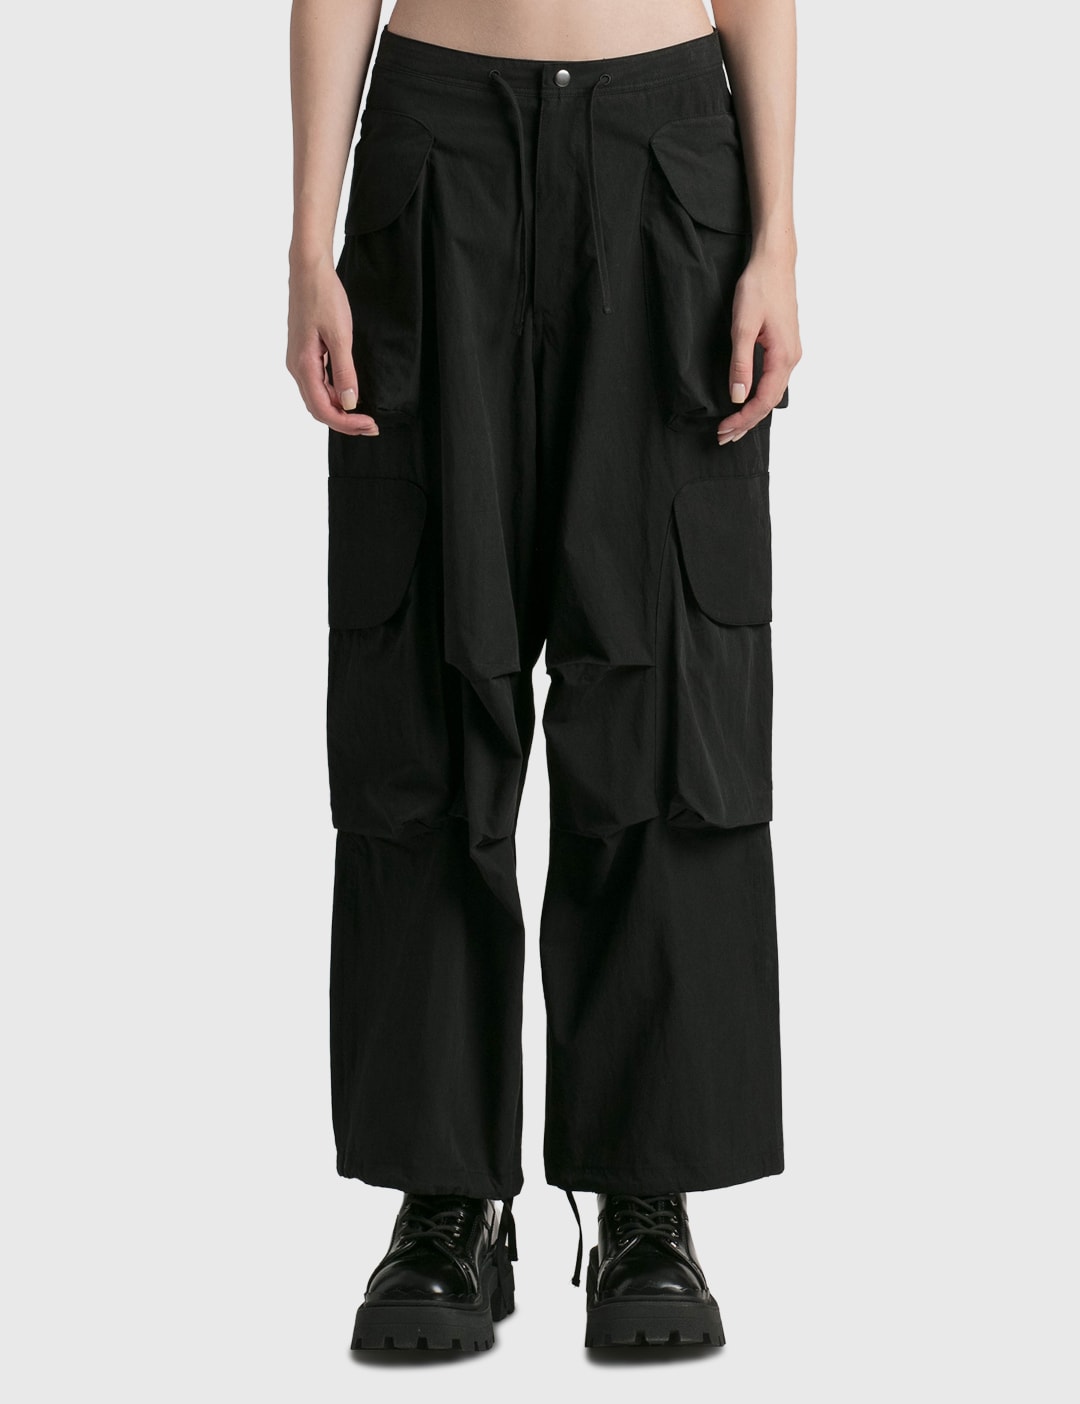 Entire Studios - GOCAR CARGO PANTS | HBX - Globally Curated Fashion and ...